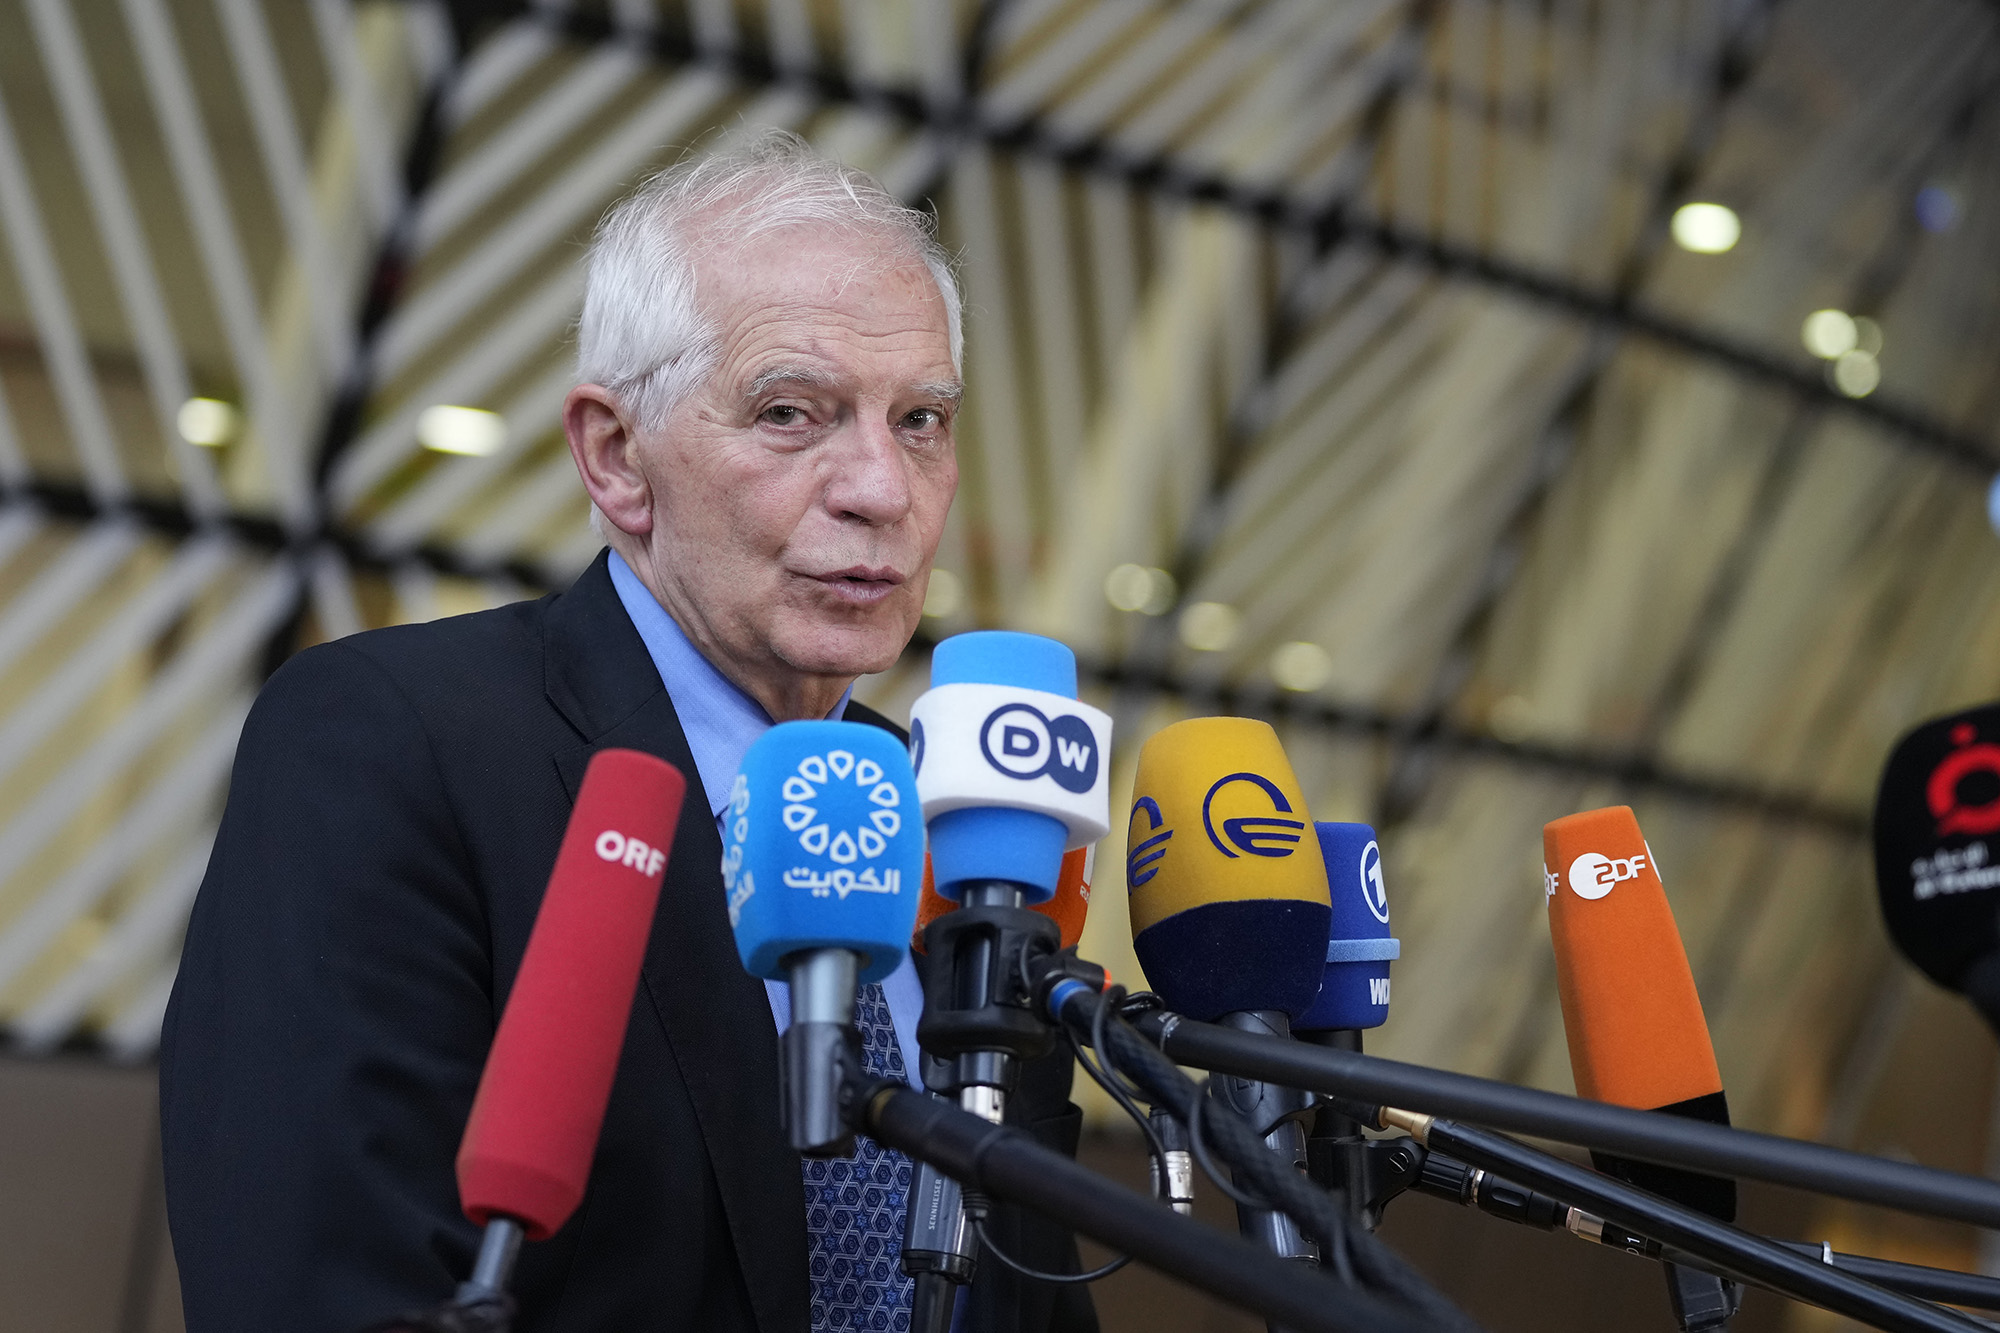 European Union foreign policy chief Josep Borrell speaks with the media as he arrives for a meeting of EU foreign ministers at the European Council building in Brussels, Belgium, on March 20.